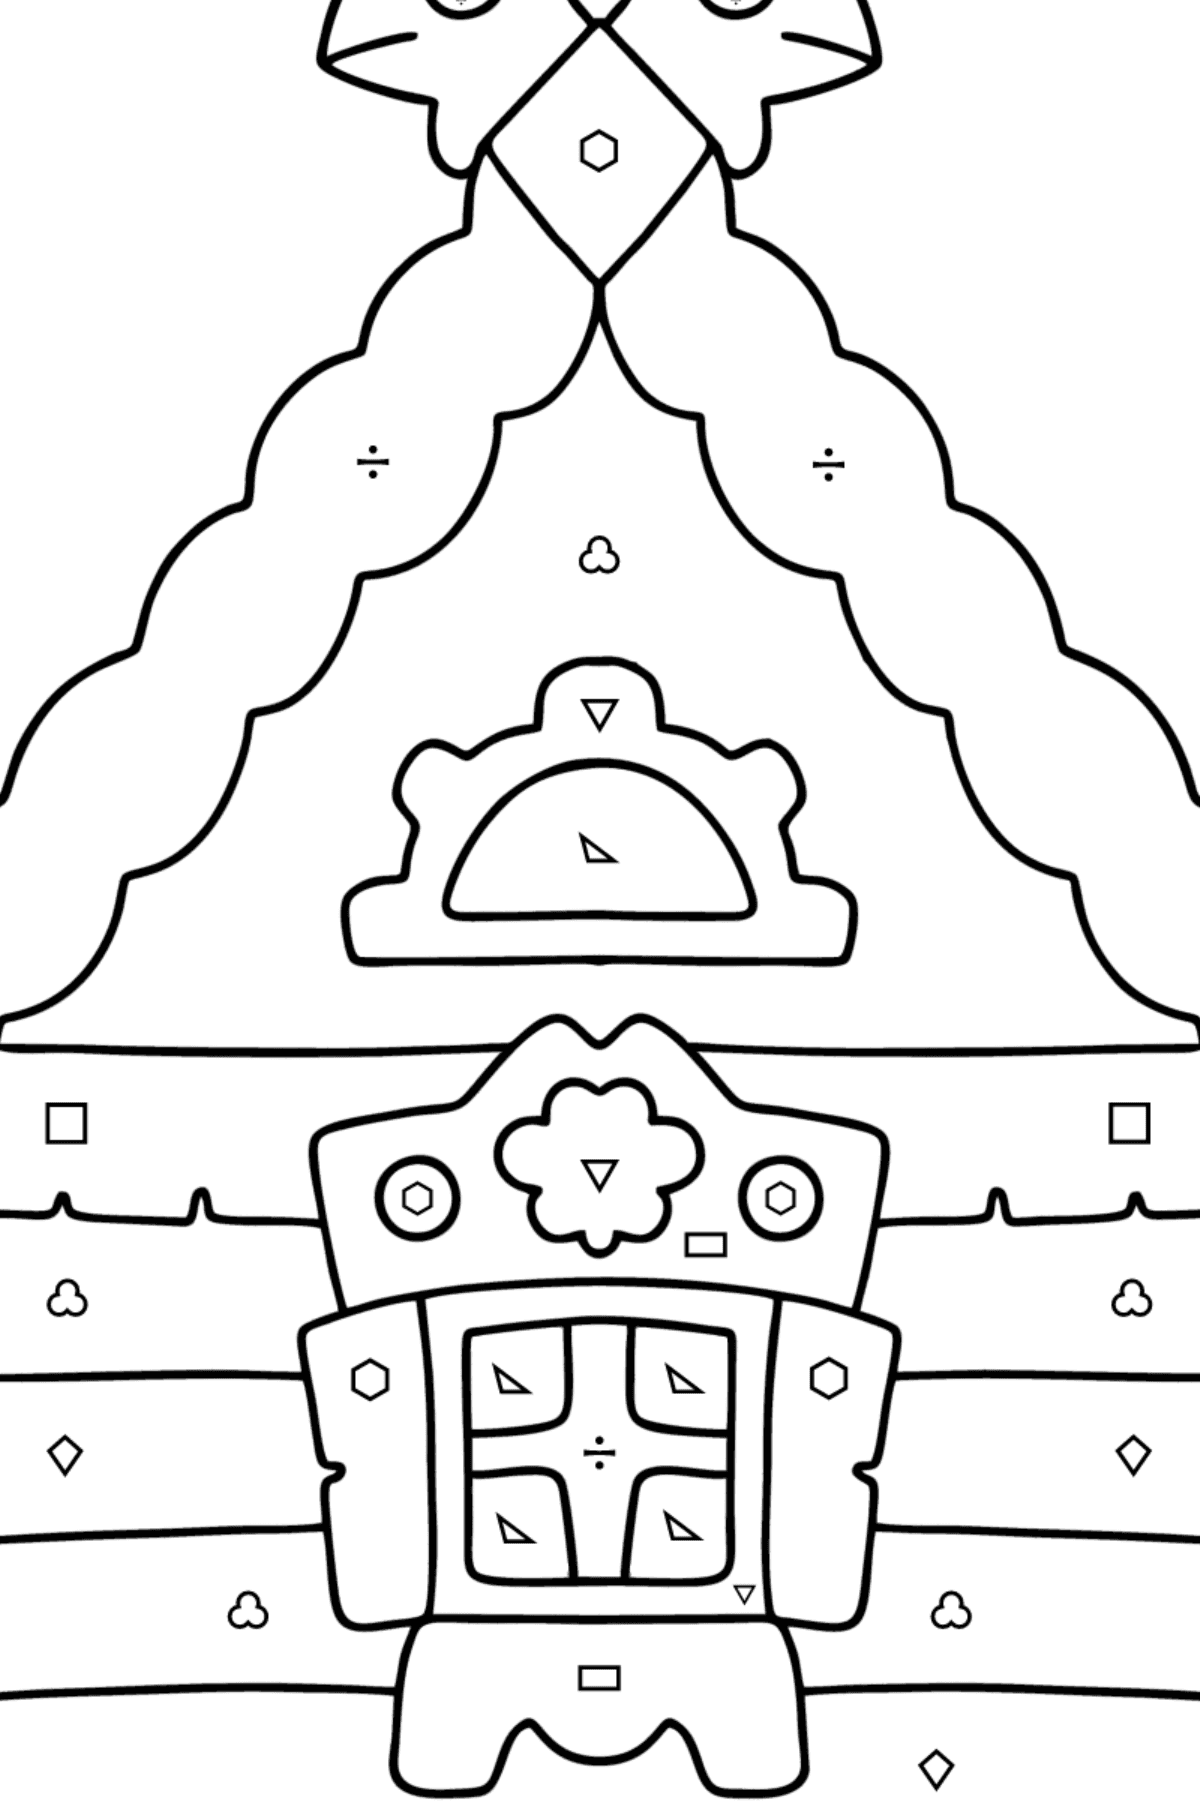 Log Cabin coloring page - Coloring by Symbols and Geometric Shapes for Kids